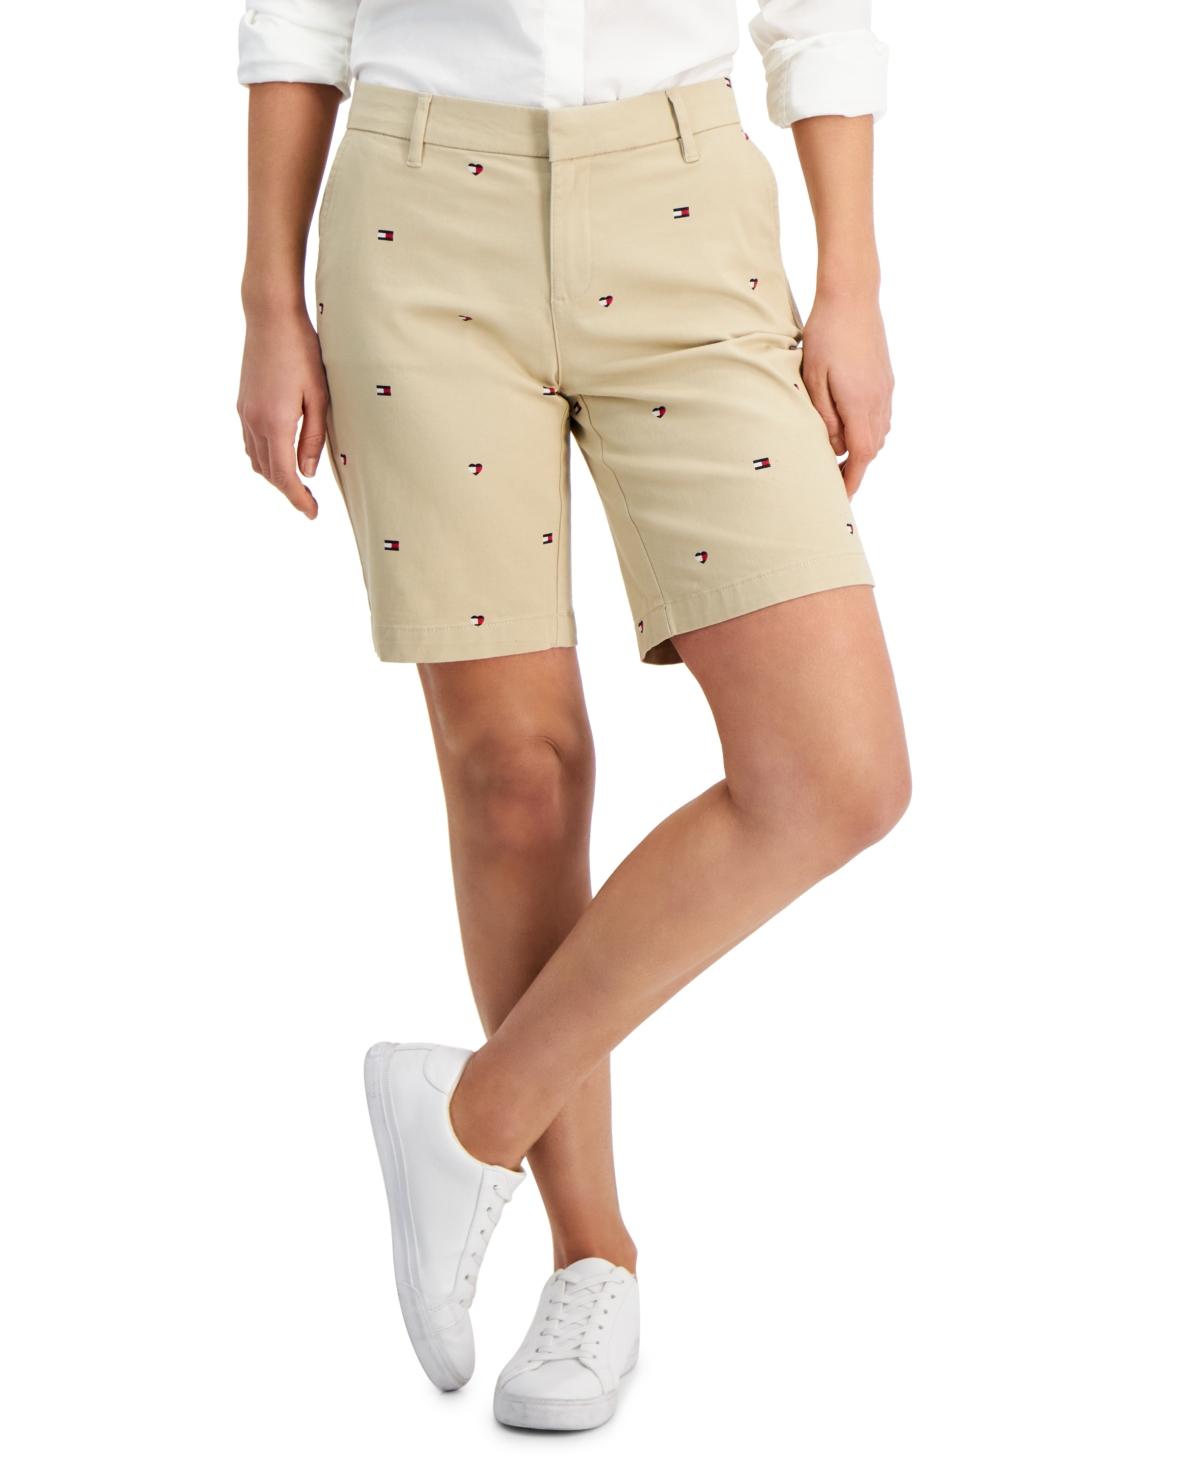 Tommy Hilfiger 9" Cotton Bermuda Shorts in Natural | Lyst